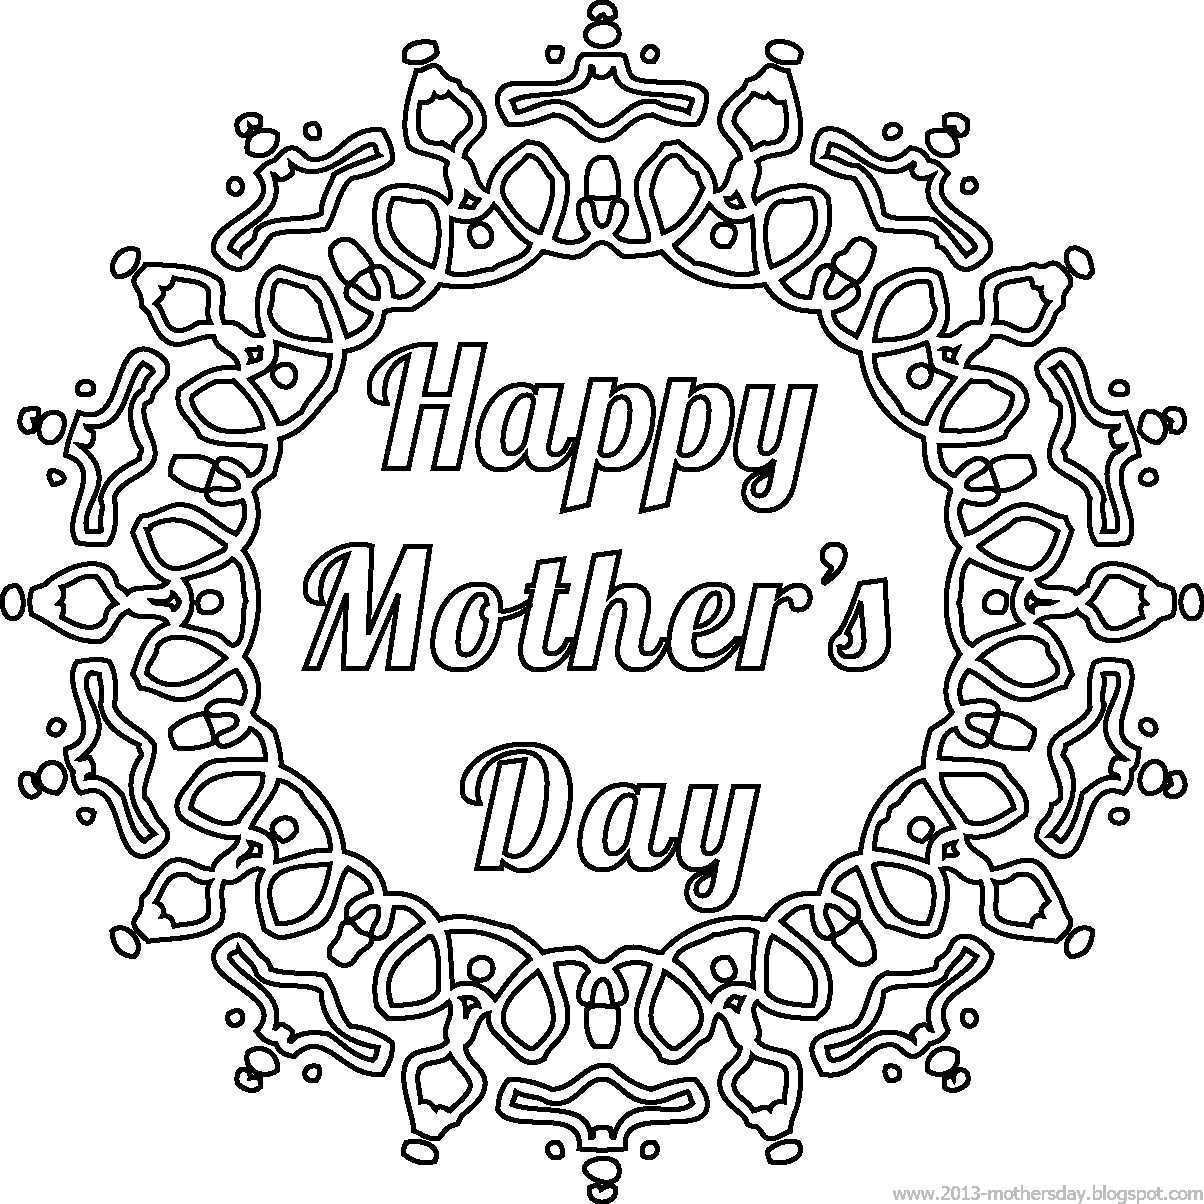 35 Free Mothers Day Card Templates For Word Templates for Mothers Day Card Templates For Word